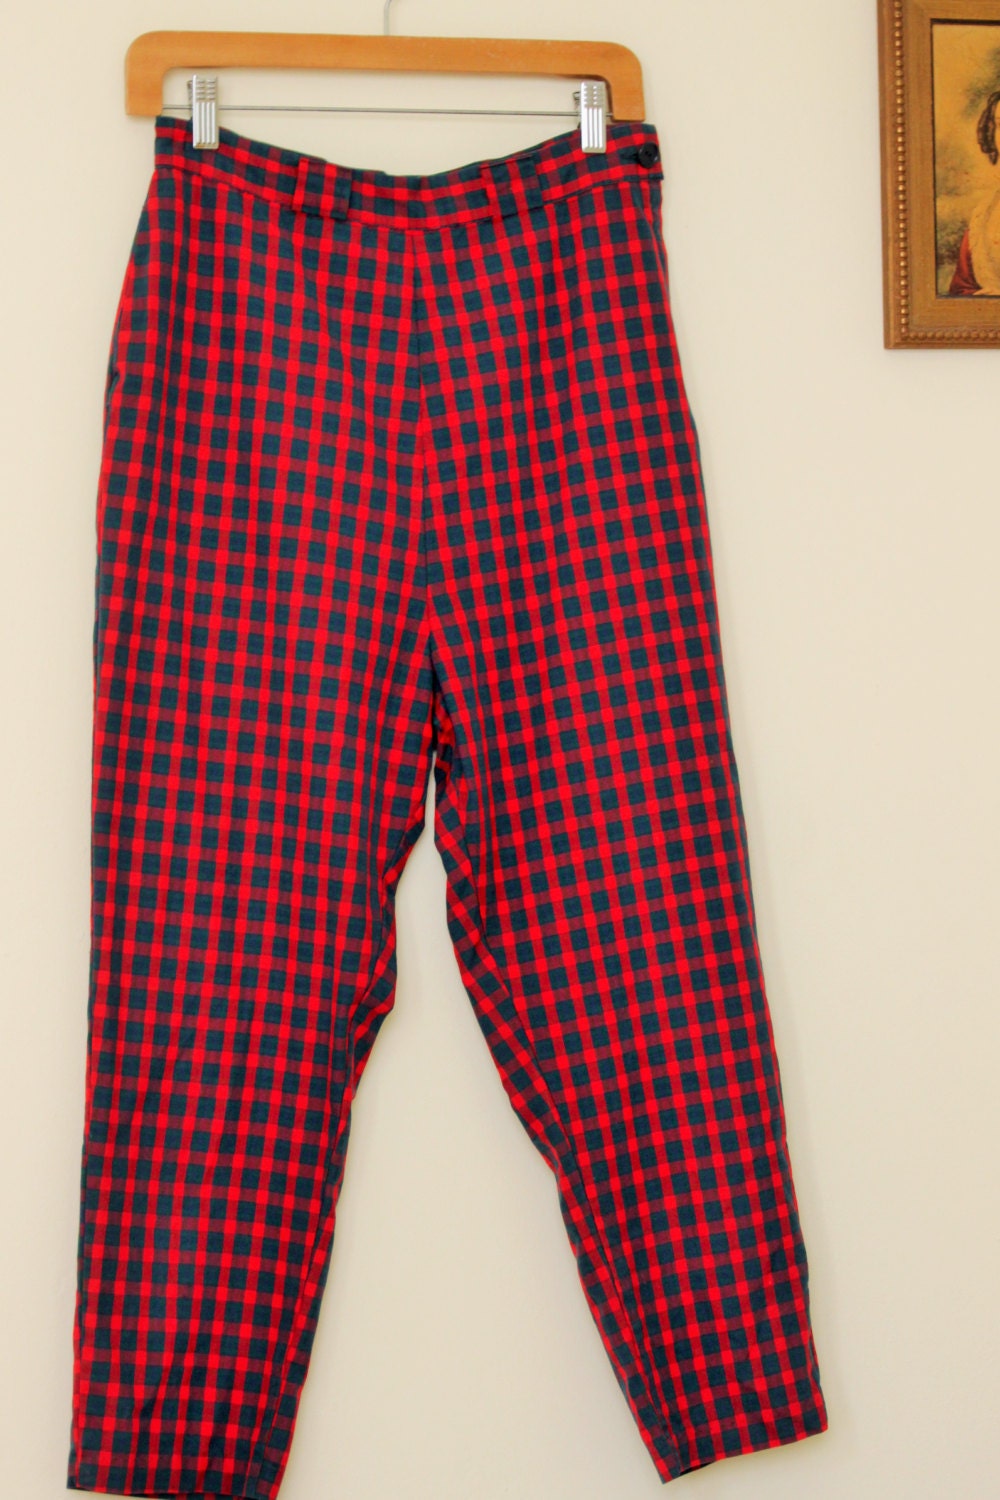 Vintage 60s Cigarette Pants / 60s Plaid Pants / Red and Green